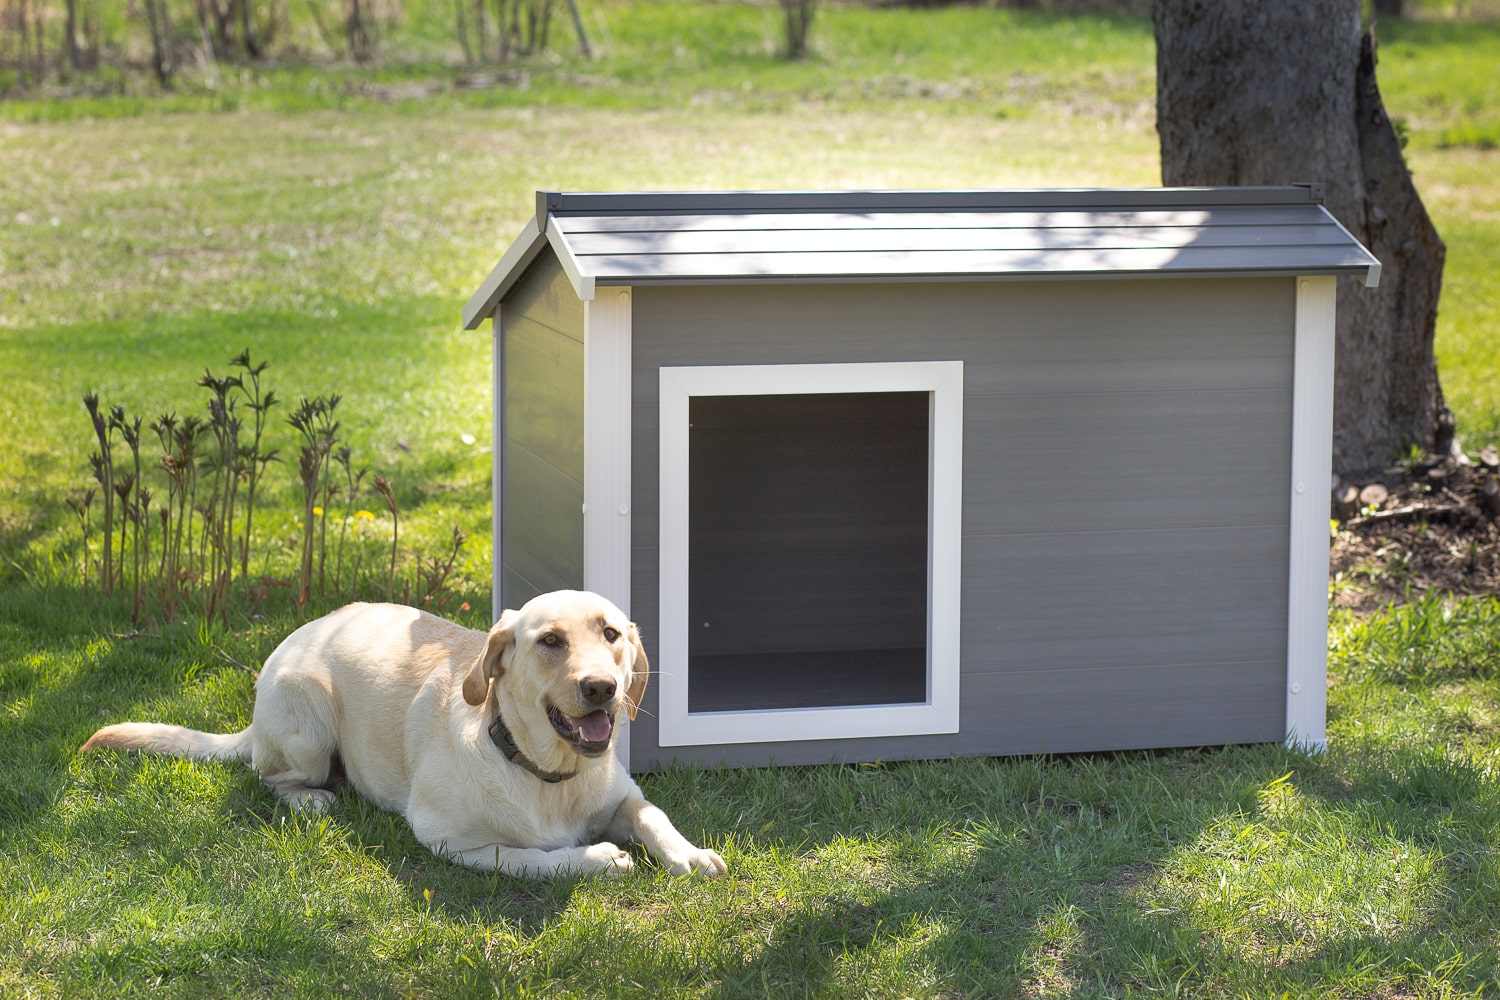 New Age Pet ThermoCore Super Insulated Dog House Protection Temperature Extremes